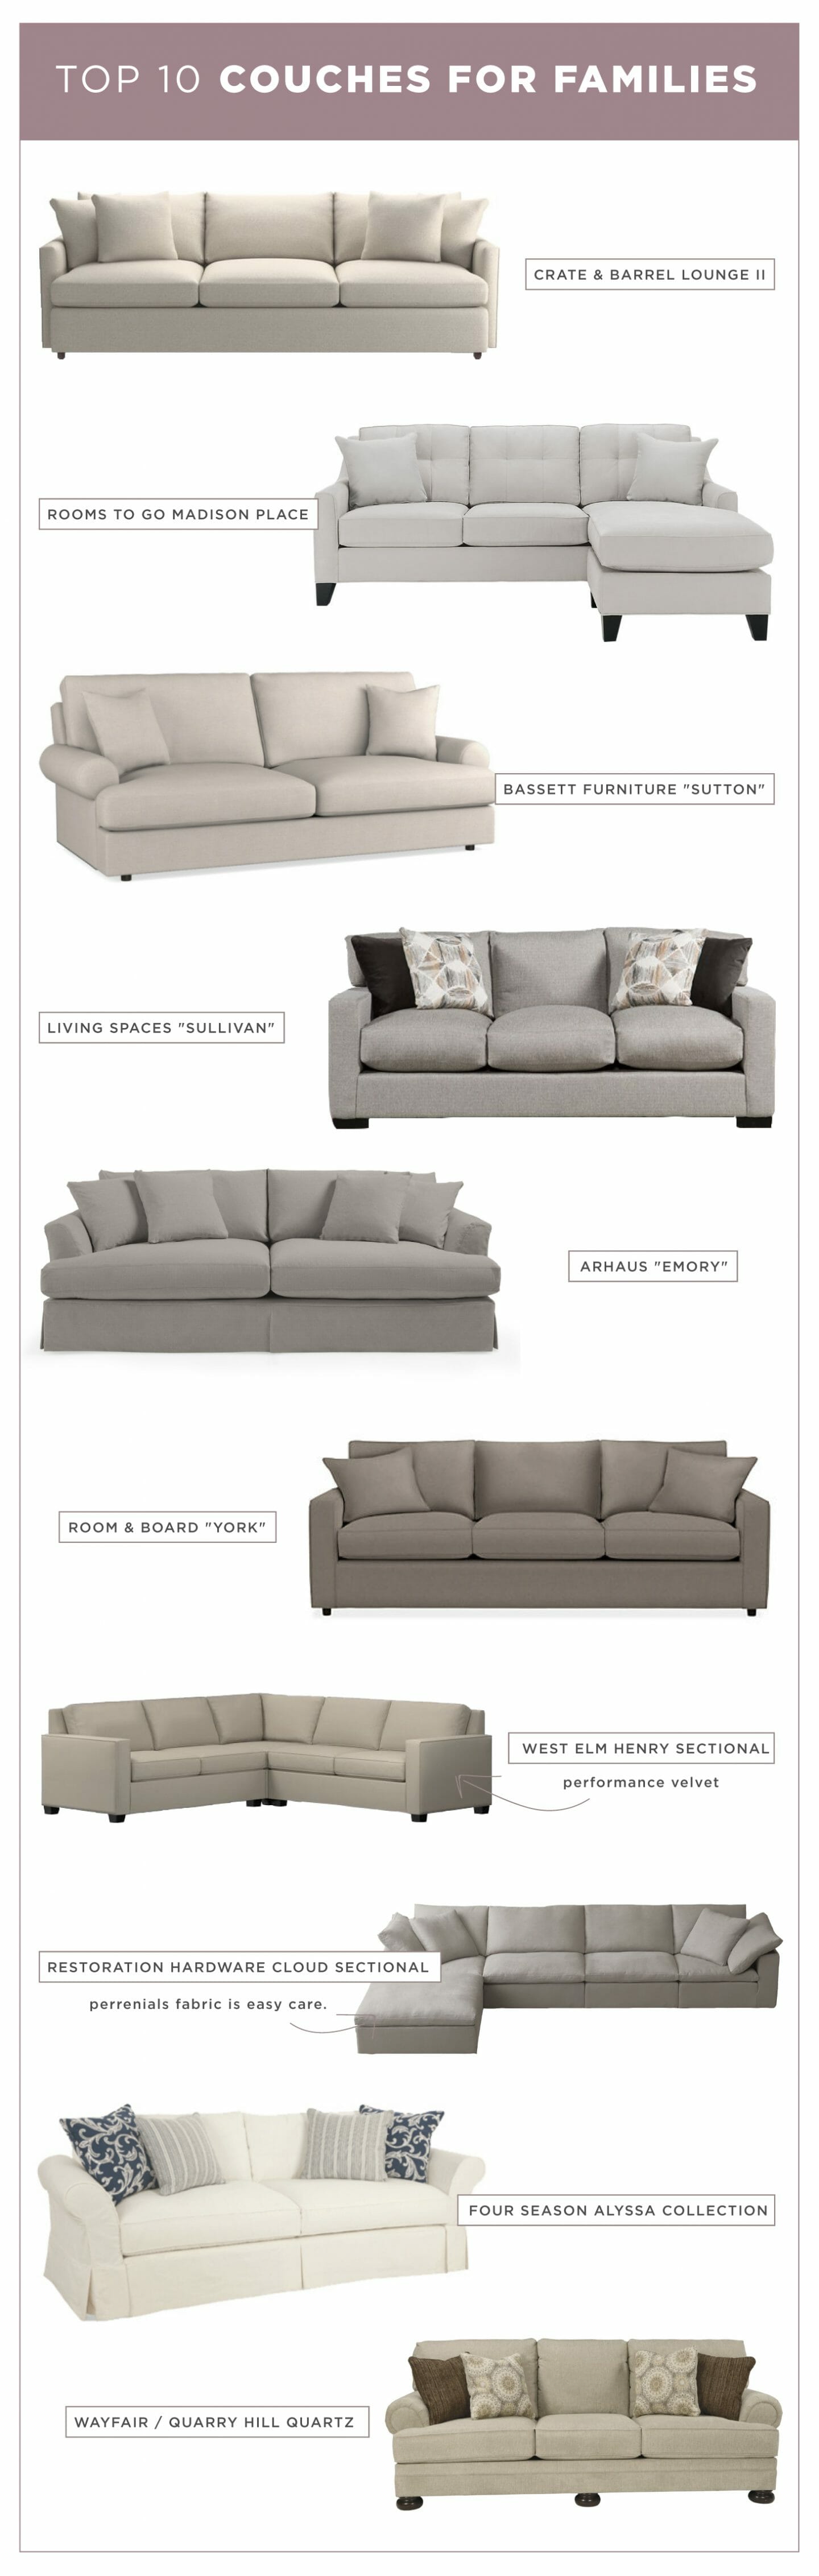 vice versa Tegenover Onvermijdelijk Most Recommended Couches for Families - Lynzy & Co.